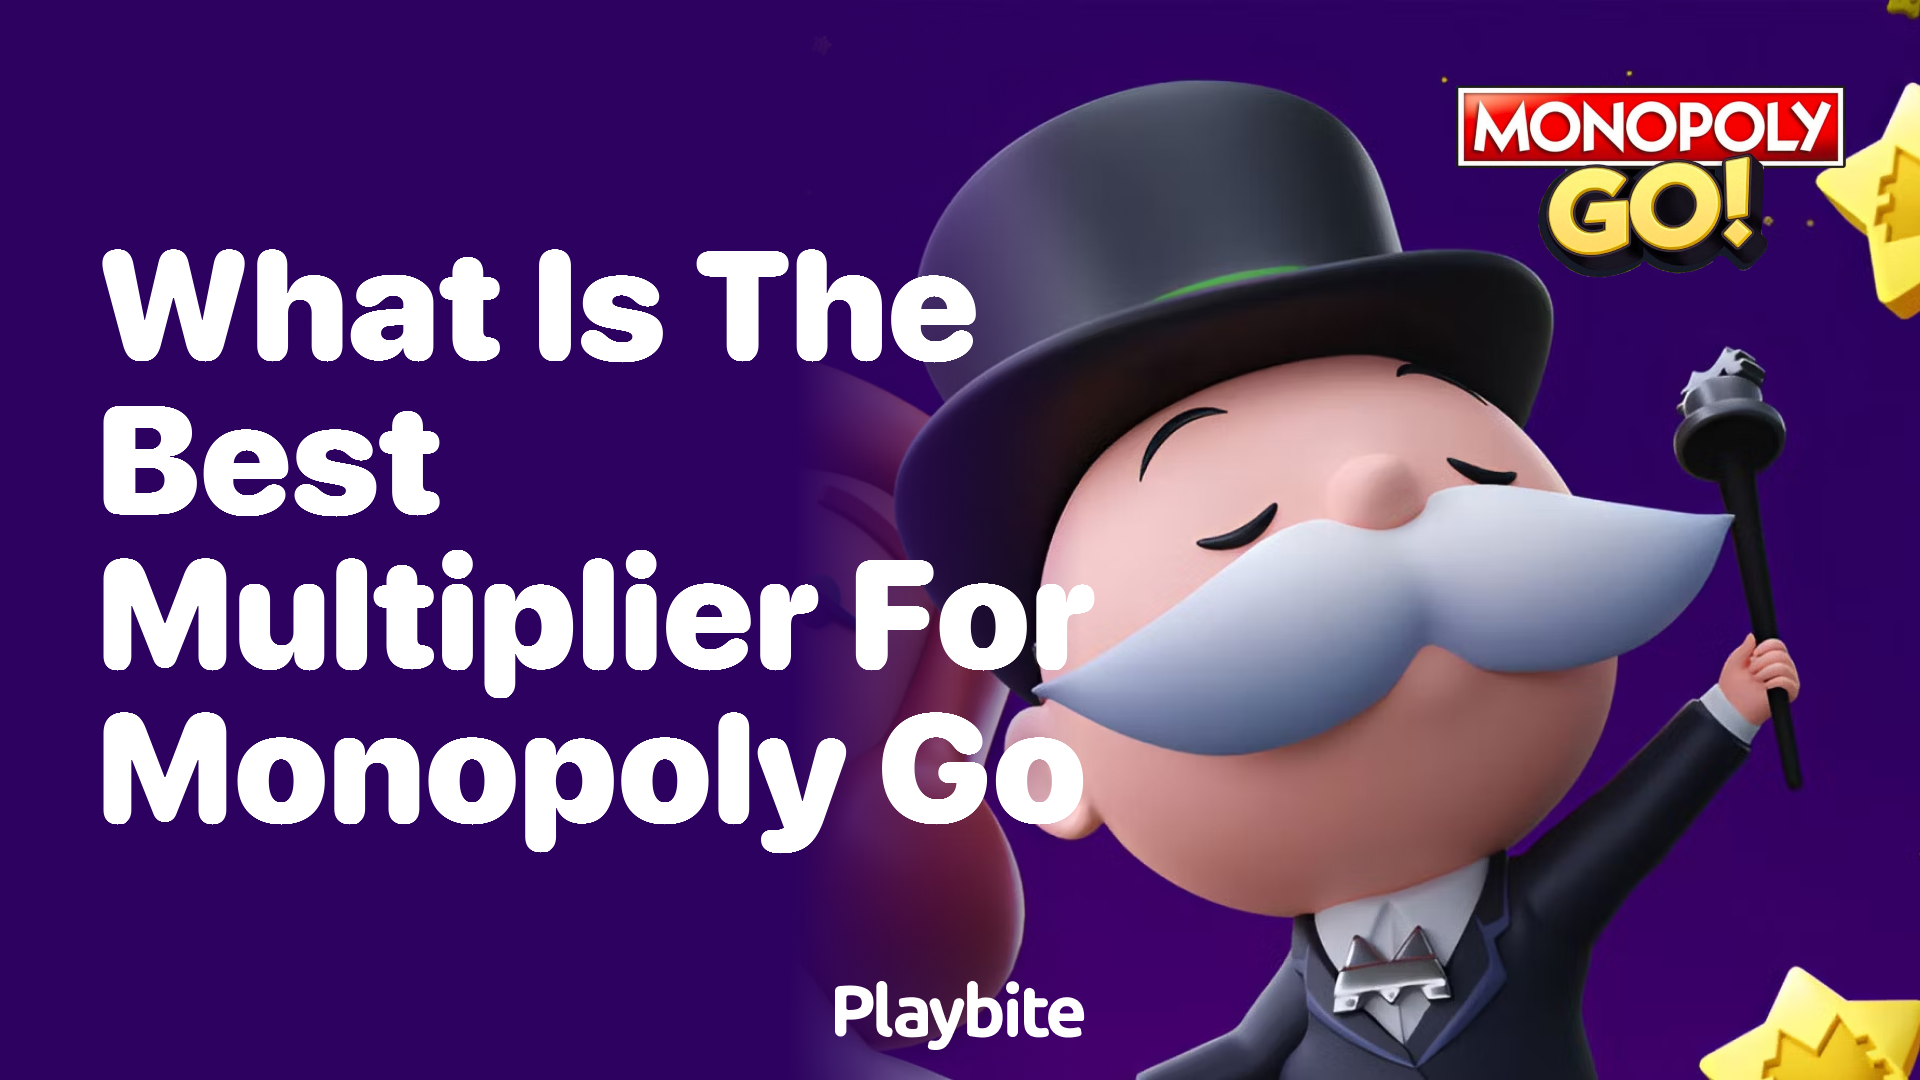 What is the Best Multiplier for Monopoly Go?